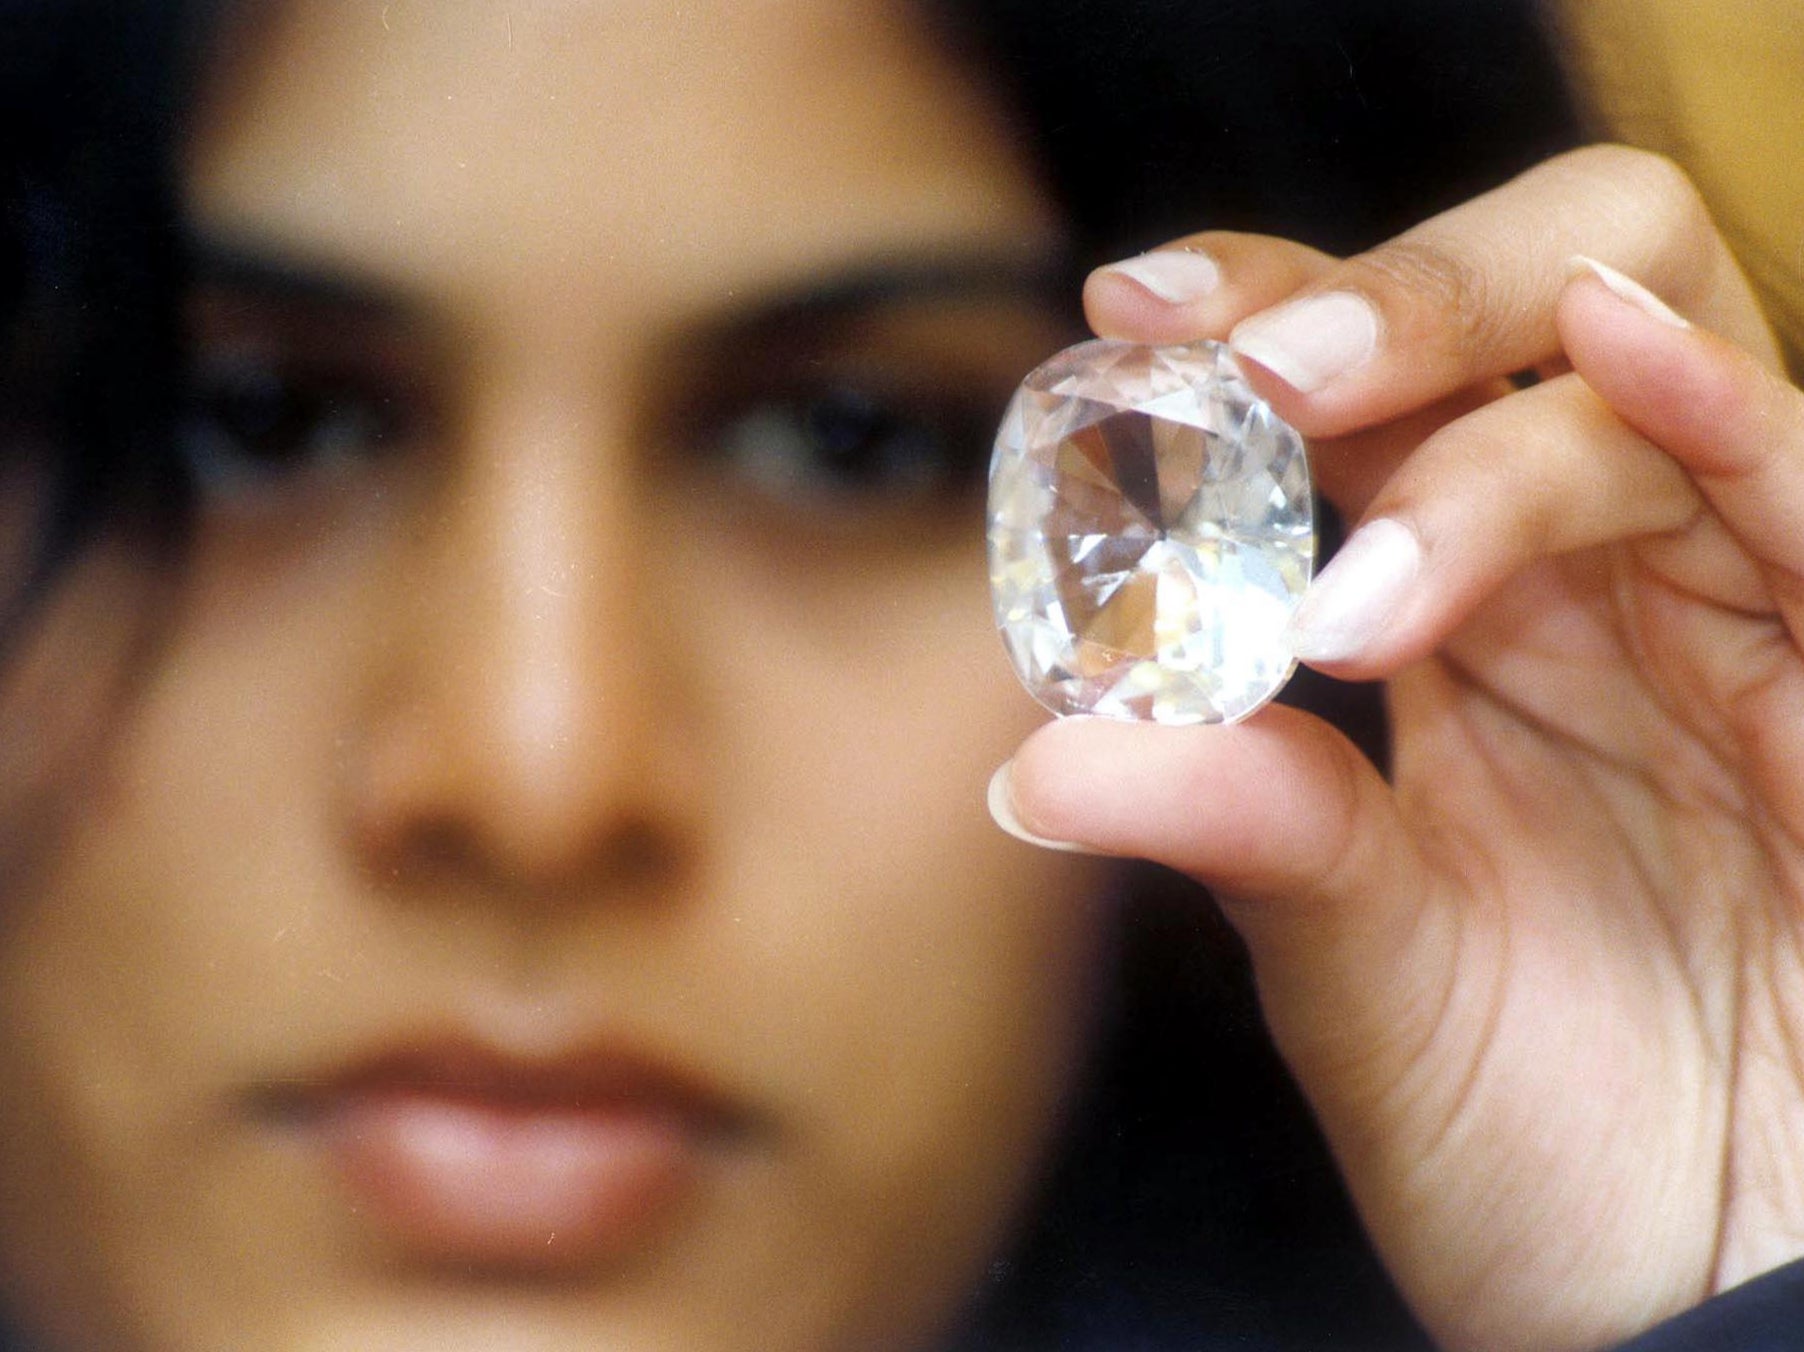 Executive Director of Jewels de Paragon (JDP) Pavana Kishore shows the "Koh-I-Noor" diamond on display with other famous diamonds at an exhibition intitled "100 World Famous Diamonds" in Bangalore 19 May 2002